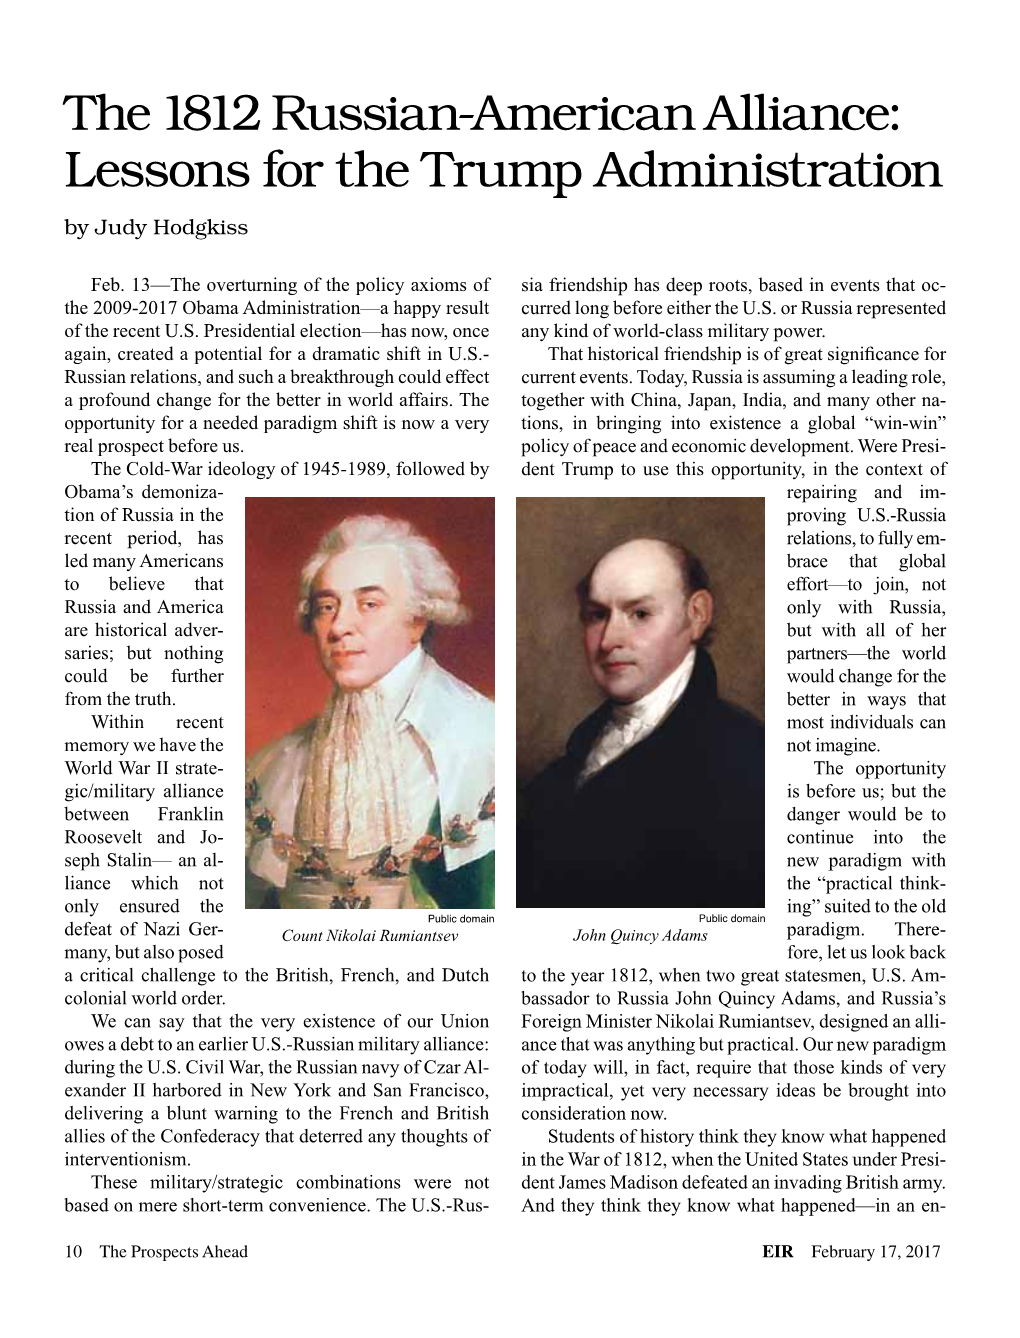 The 1812 Russian-American Alliance: Lessons for the Trump Administration by Judy Hodgkiss